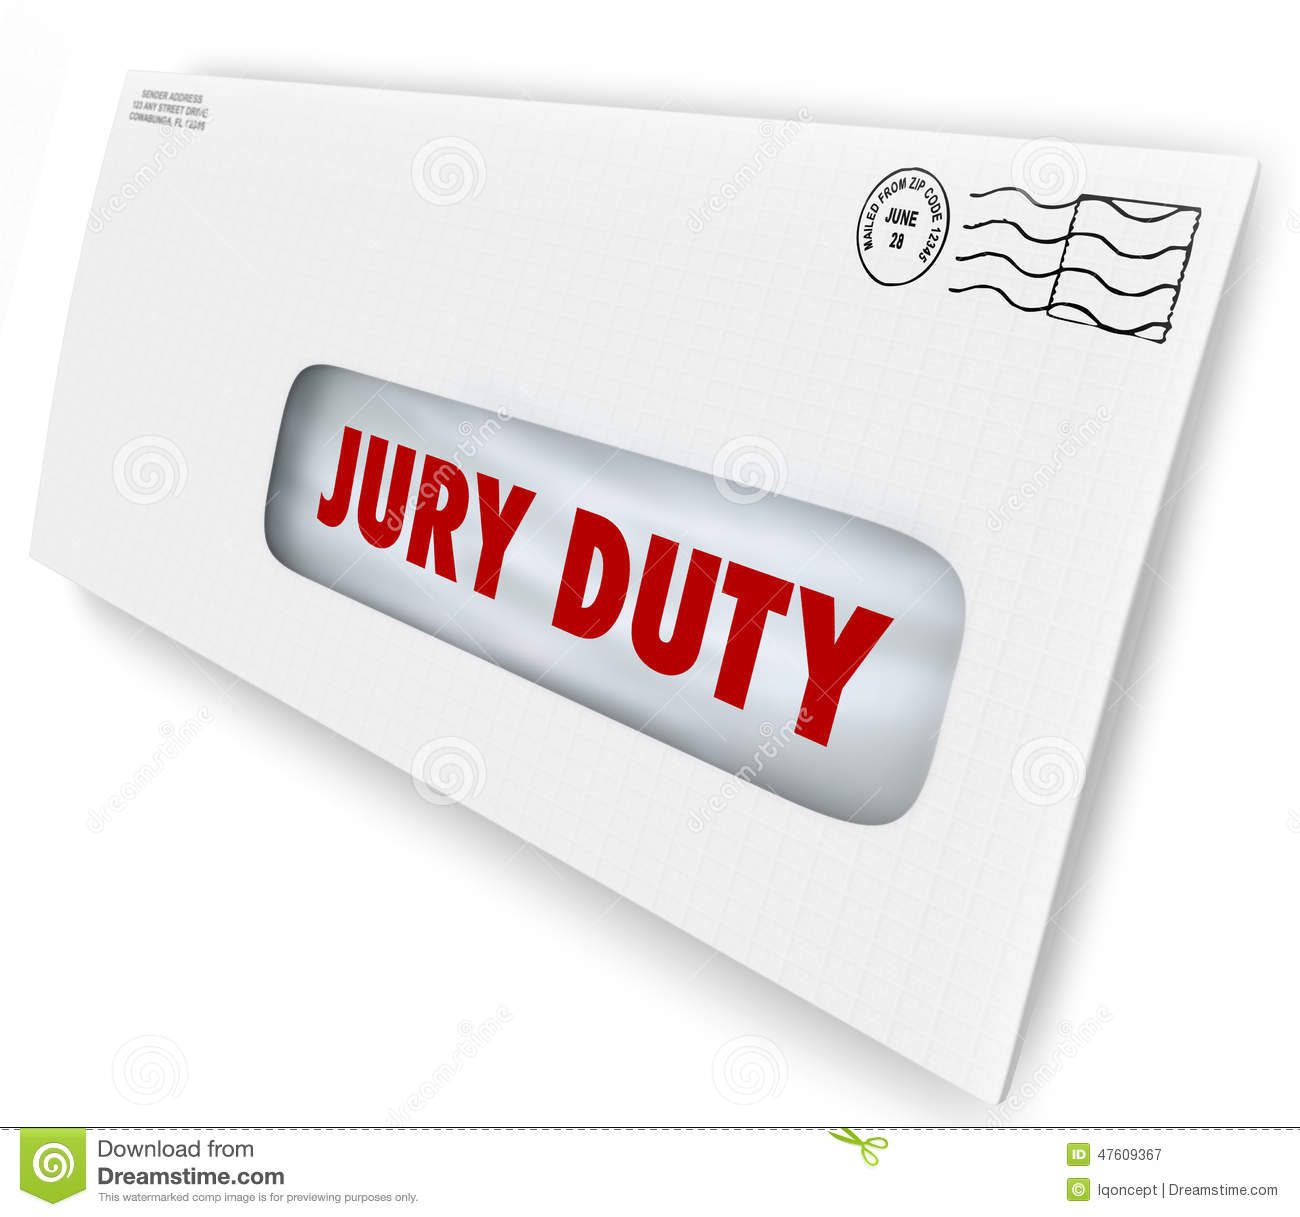 Jury Duty Words On A Letter In An Envelope Summoning You To Appear In